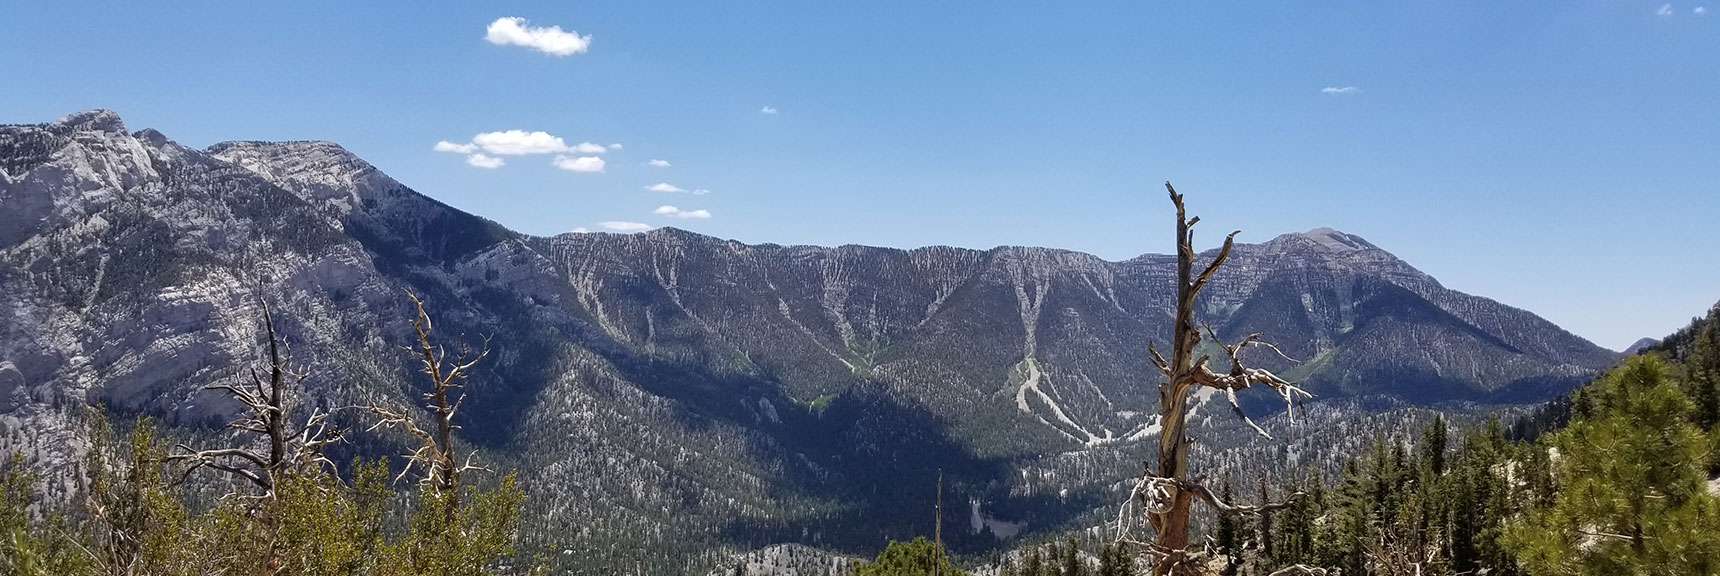 Large View of Upper Ridge of Kyle Canyon. Mummy Mt. (left); Lee and Charleston Peaks (right) | Lee Canyon to Kyle Canyon | Potential Routes | Mt Charleston Wilderness | Spring Mountains, Nevada